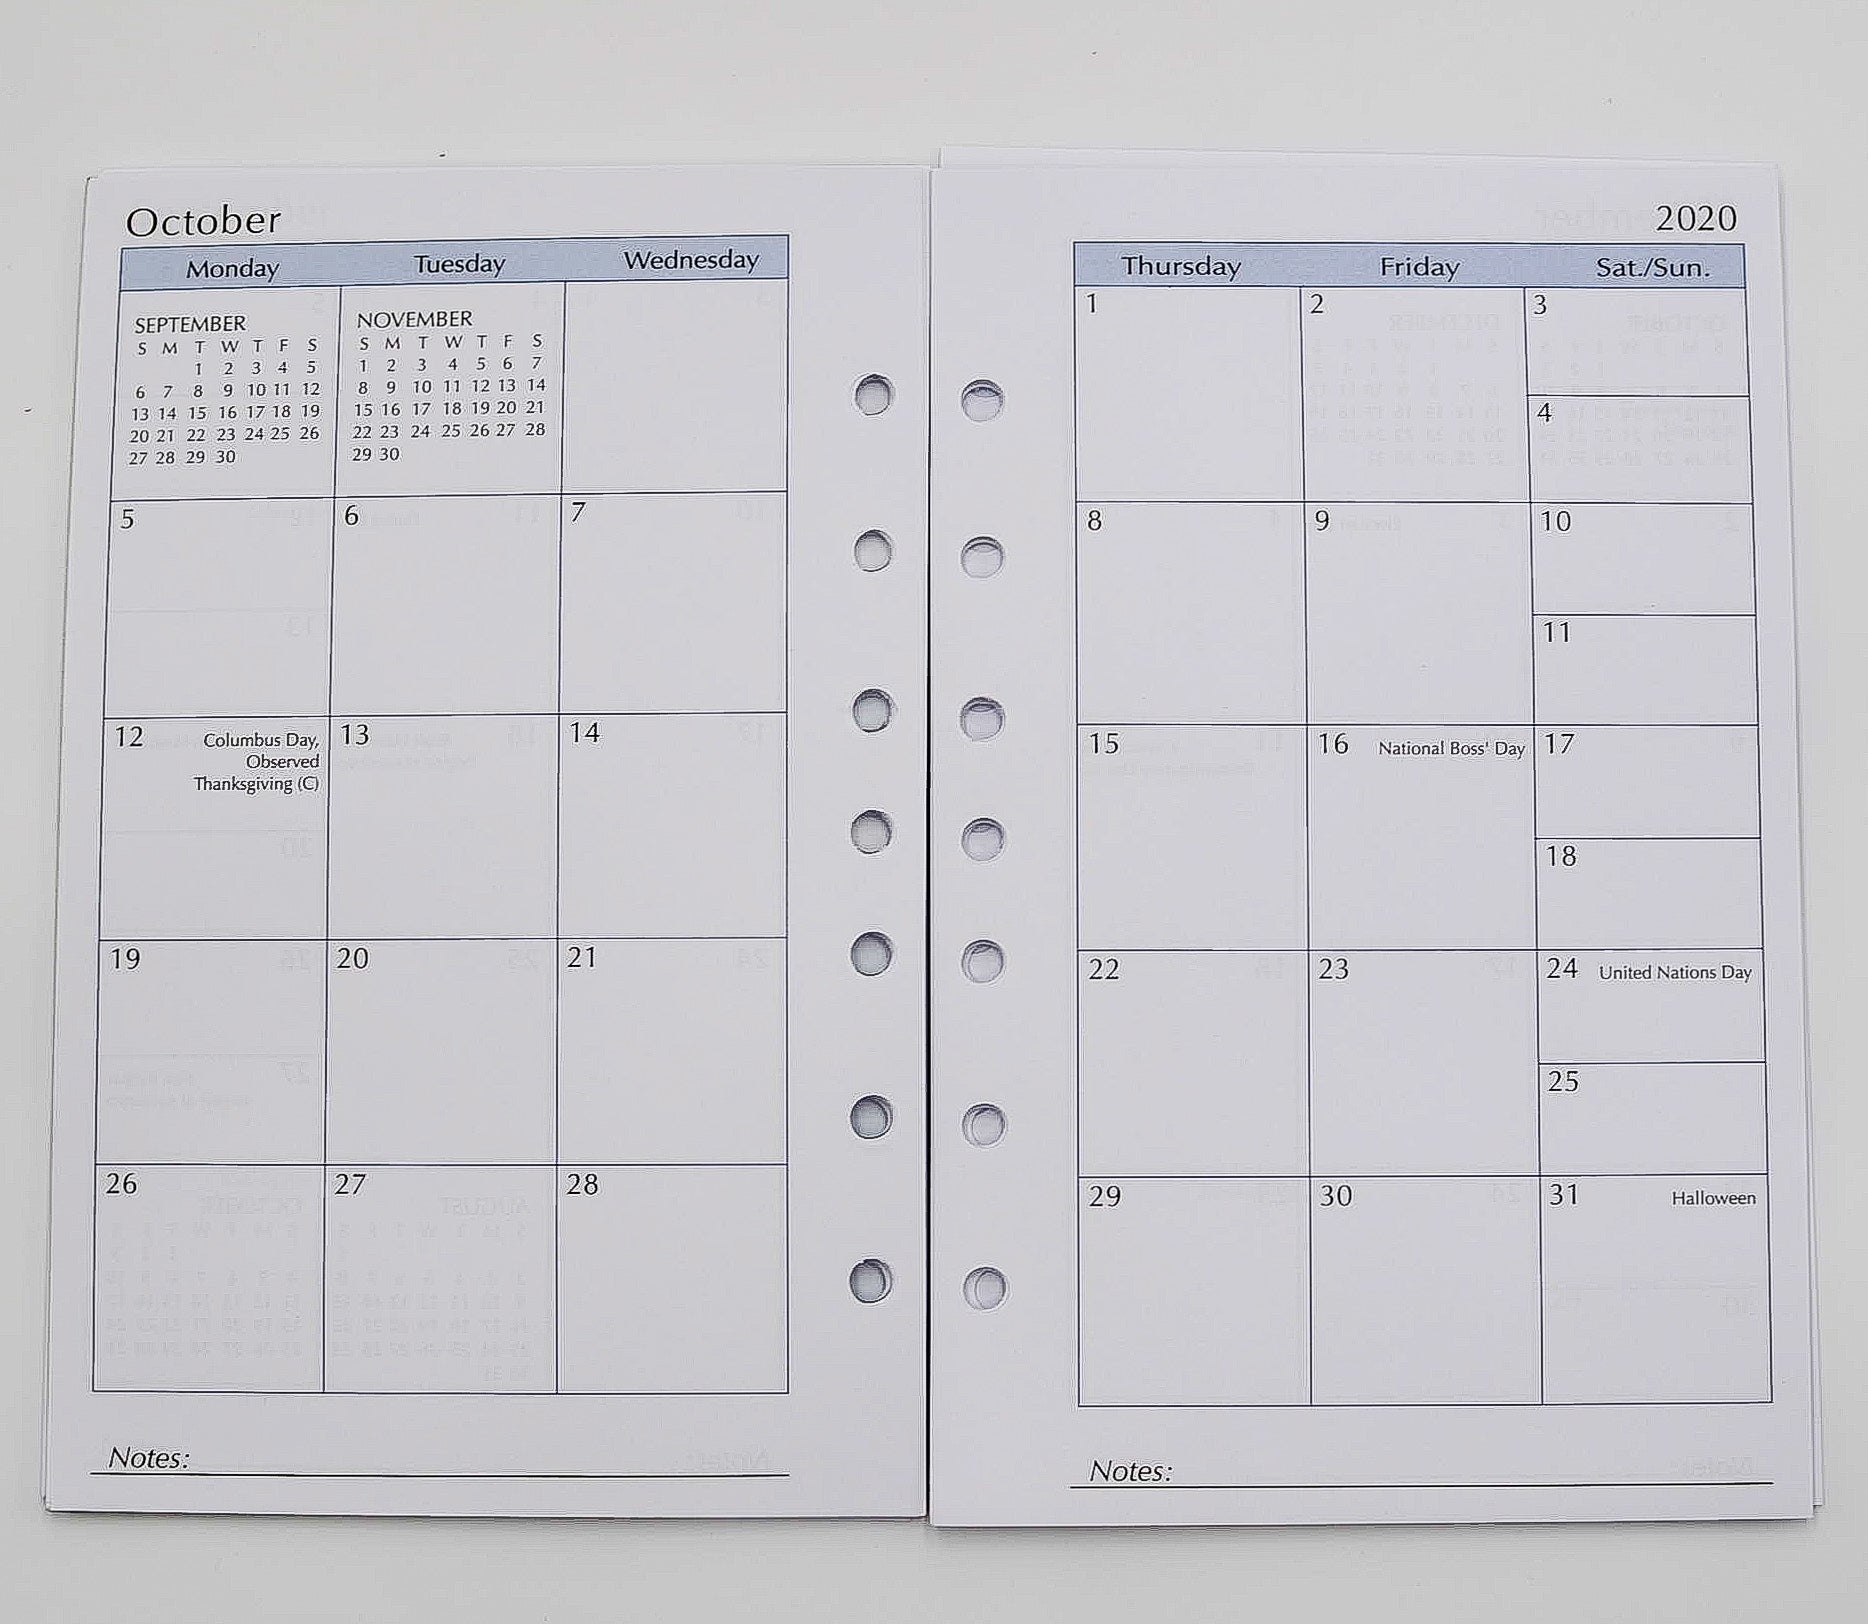 2020 calendar McCarthy Planner- Item MP58P7 12 Month Planner  White paper. Size 8-1/2"X 5-1/2" 7 -Ring 144 pages; Weekly and Monthly View Format. One agenda planner; two formats. Also includes a 3 Yearly View, 12 Monthly View, 52 Weekly View. And includes Advance Planning, Important Dates, International Holidays, Birthdays and Anniversaries, Weights and Measures, Weather, Interest Rates, Road and Air Miles...and more! Calendar refill only.  Made in the USA! loose leaf paper agenda refill insert organizer 